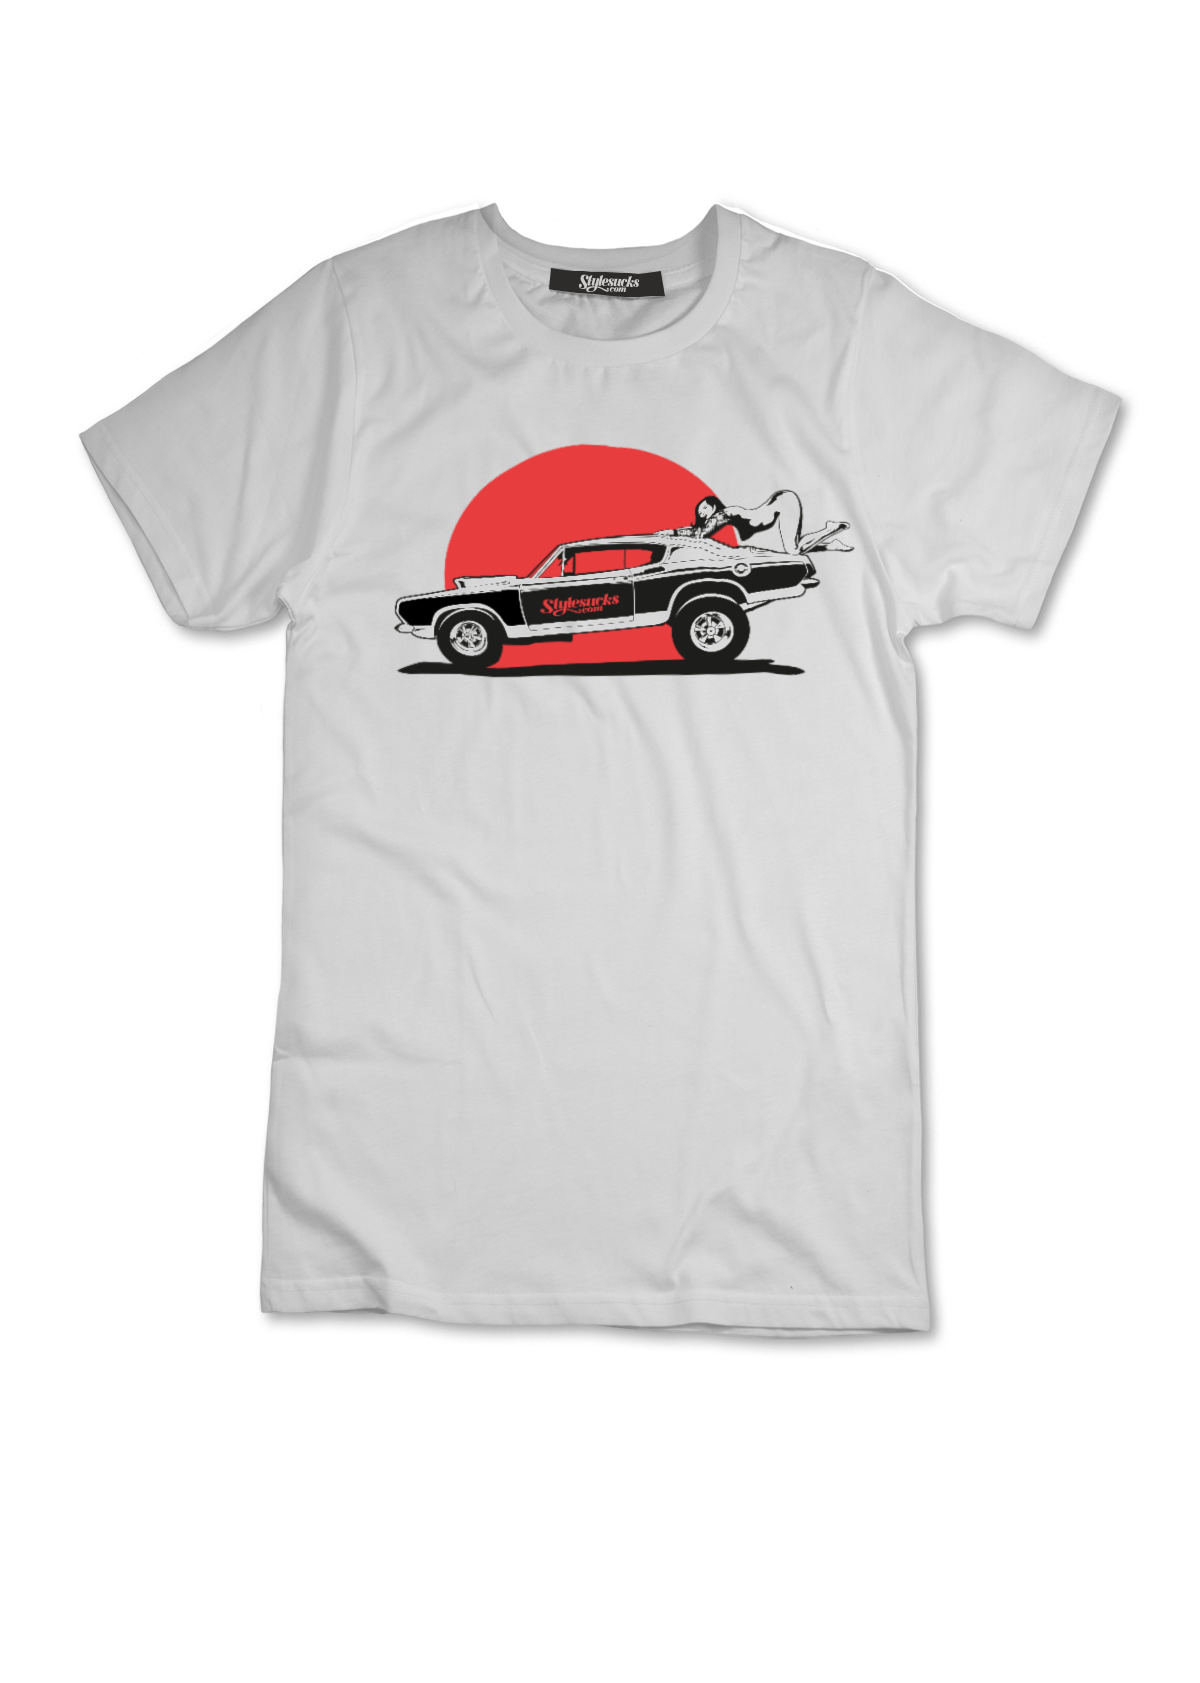 Gettin' forward in style Part No.4 T-Shirt